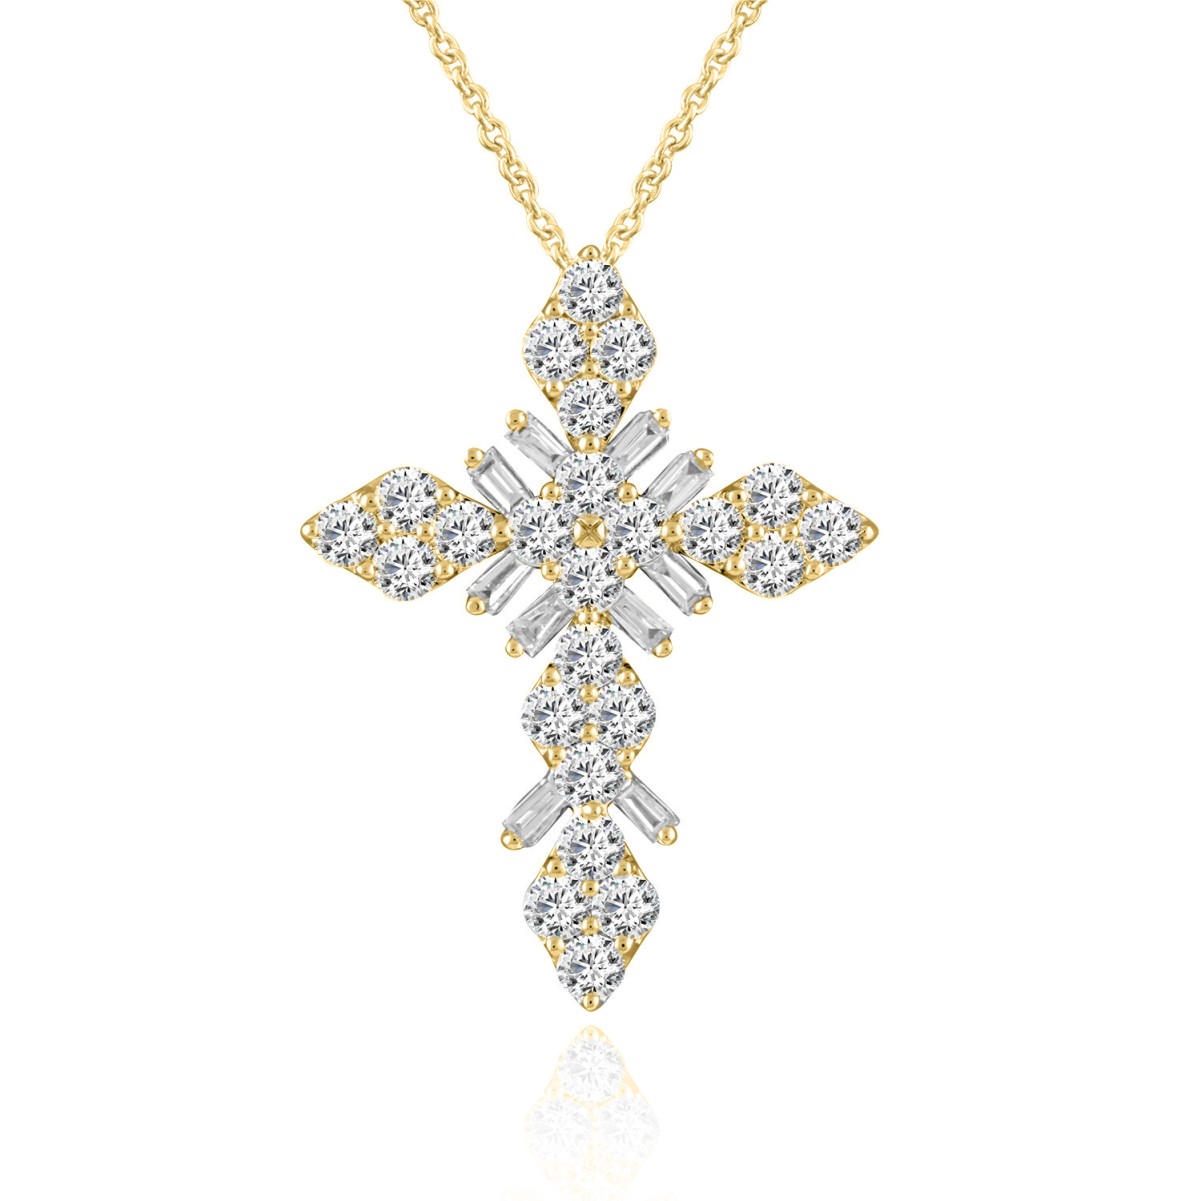 18K YELLOW GOLD 1CT ROUND/BAGUETTE DIAMOND LADIES PENDANT WITH CHAIN  